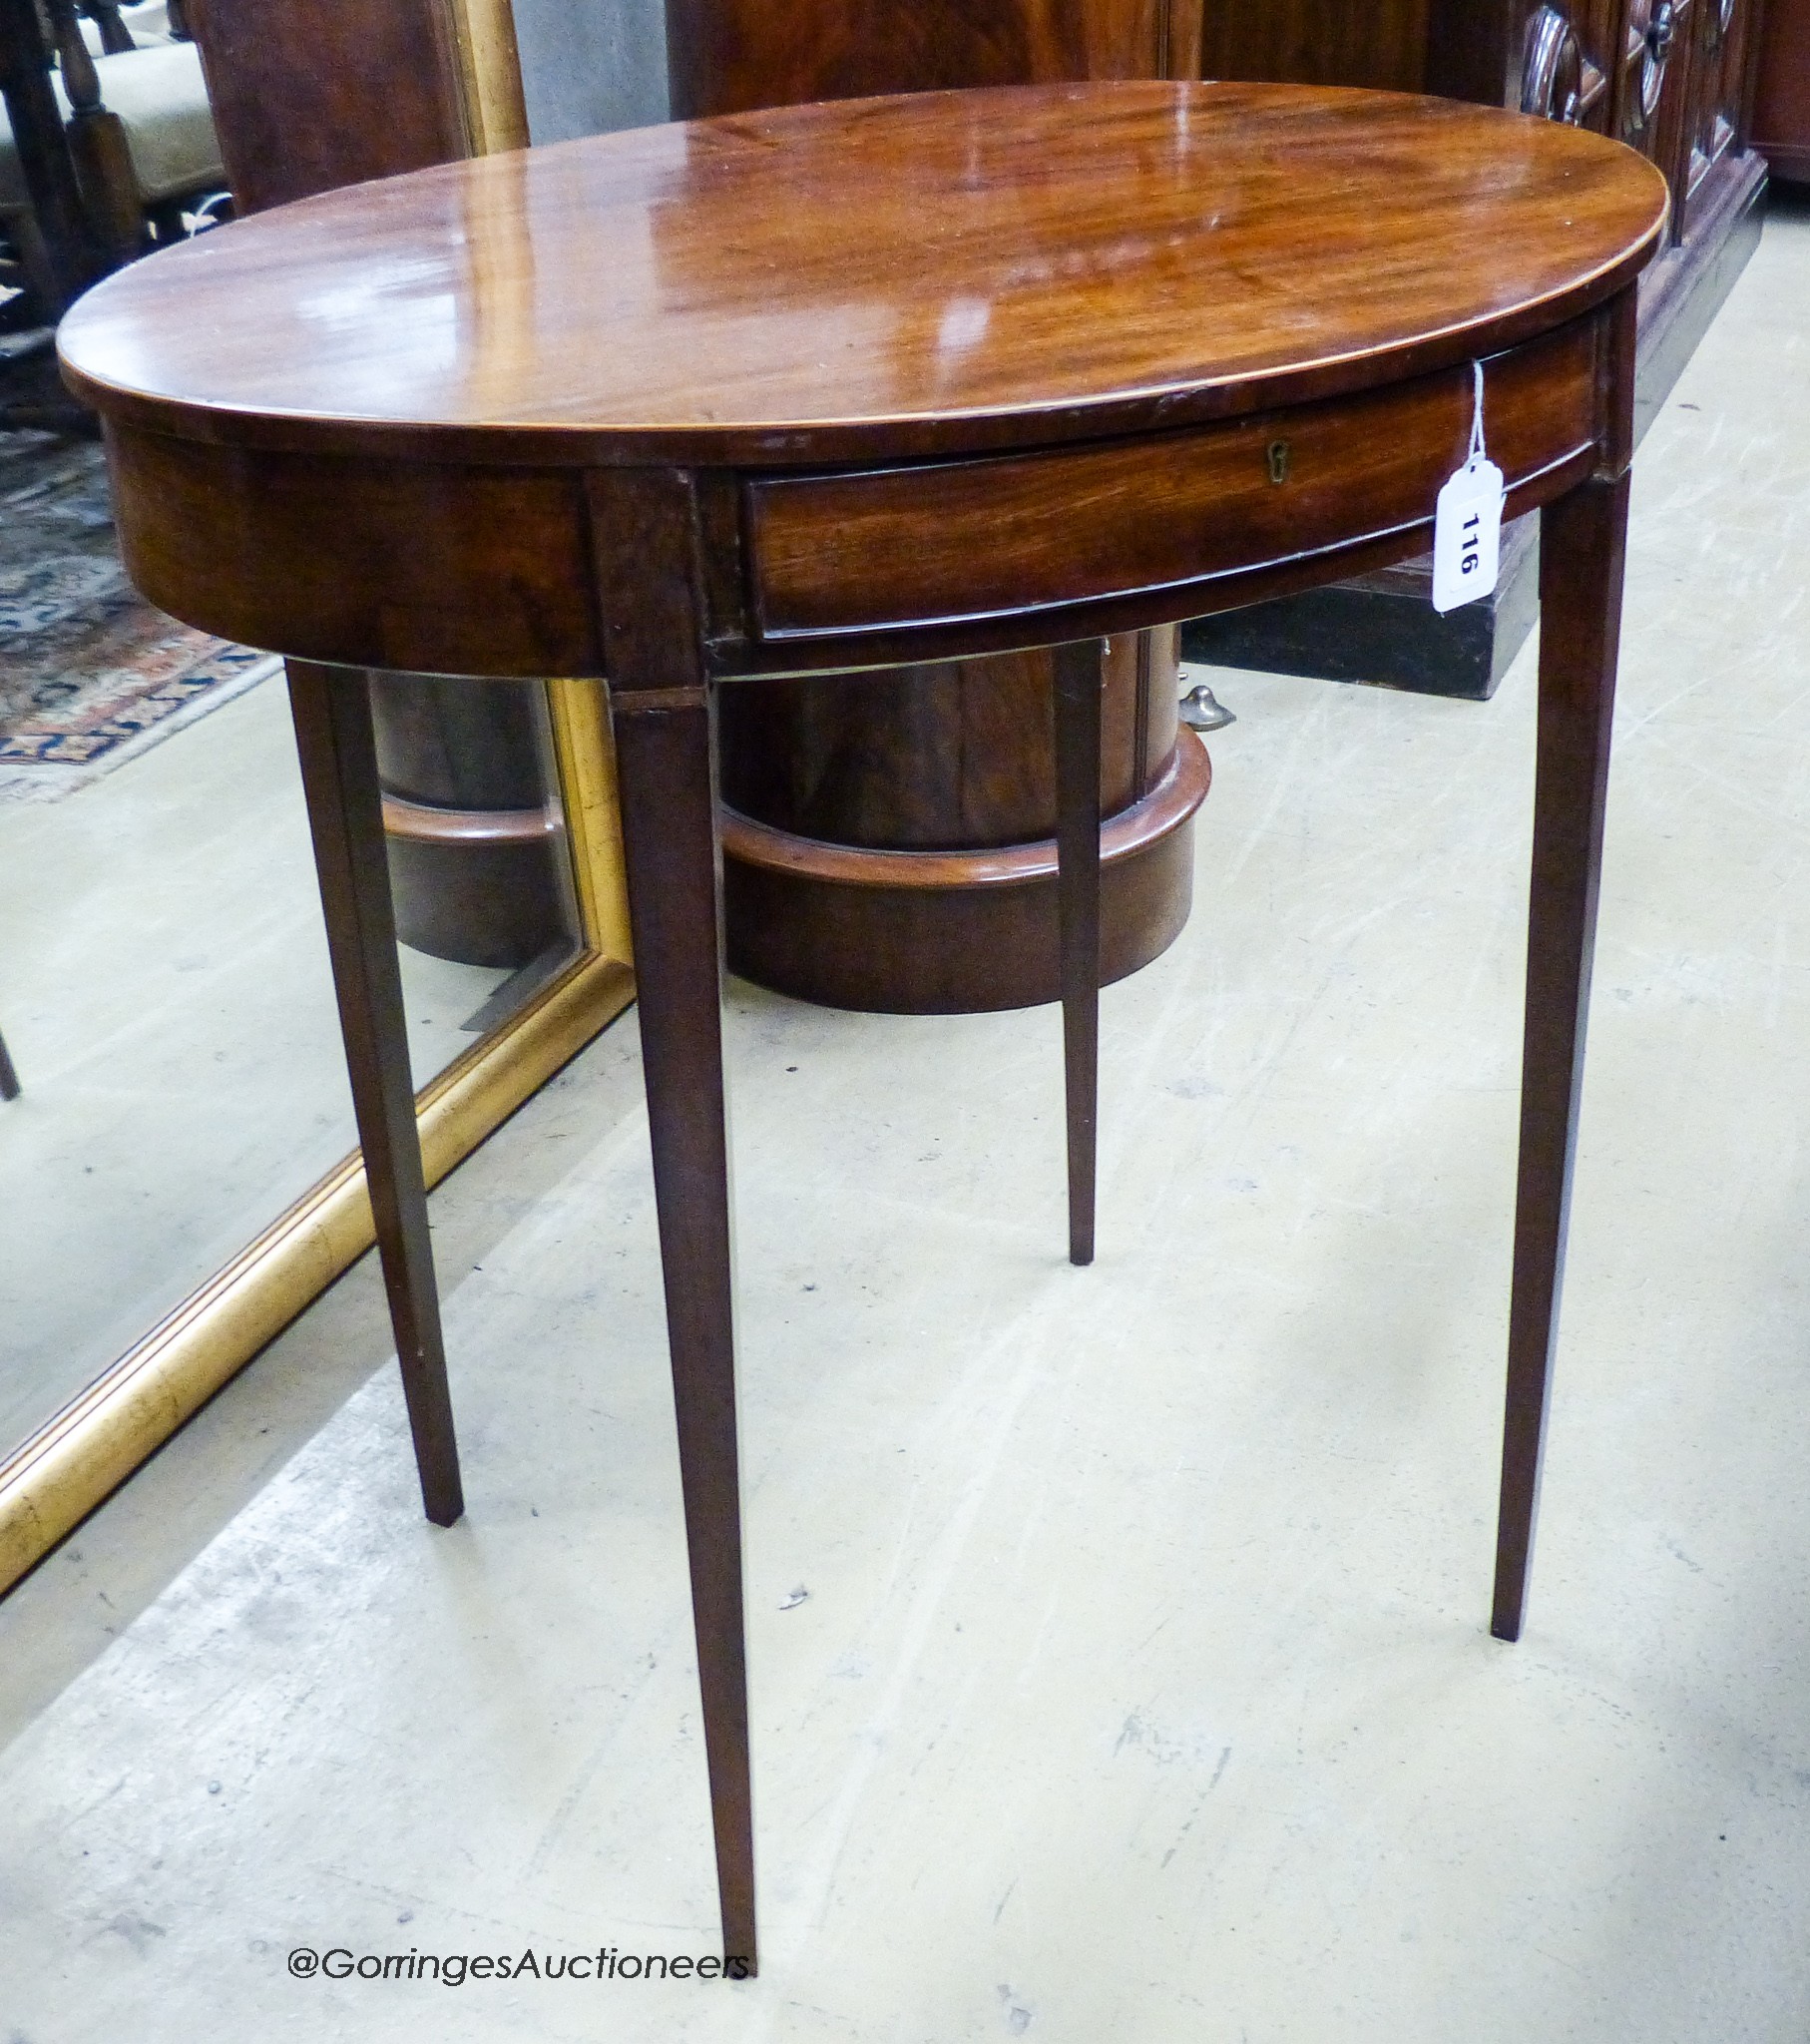 An early 19th century and later oval mahogany table, width 65cm, depth 49cm, height 67cm